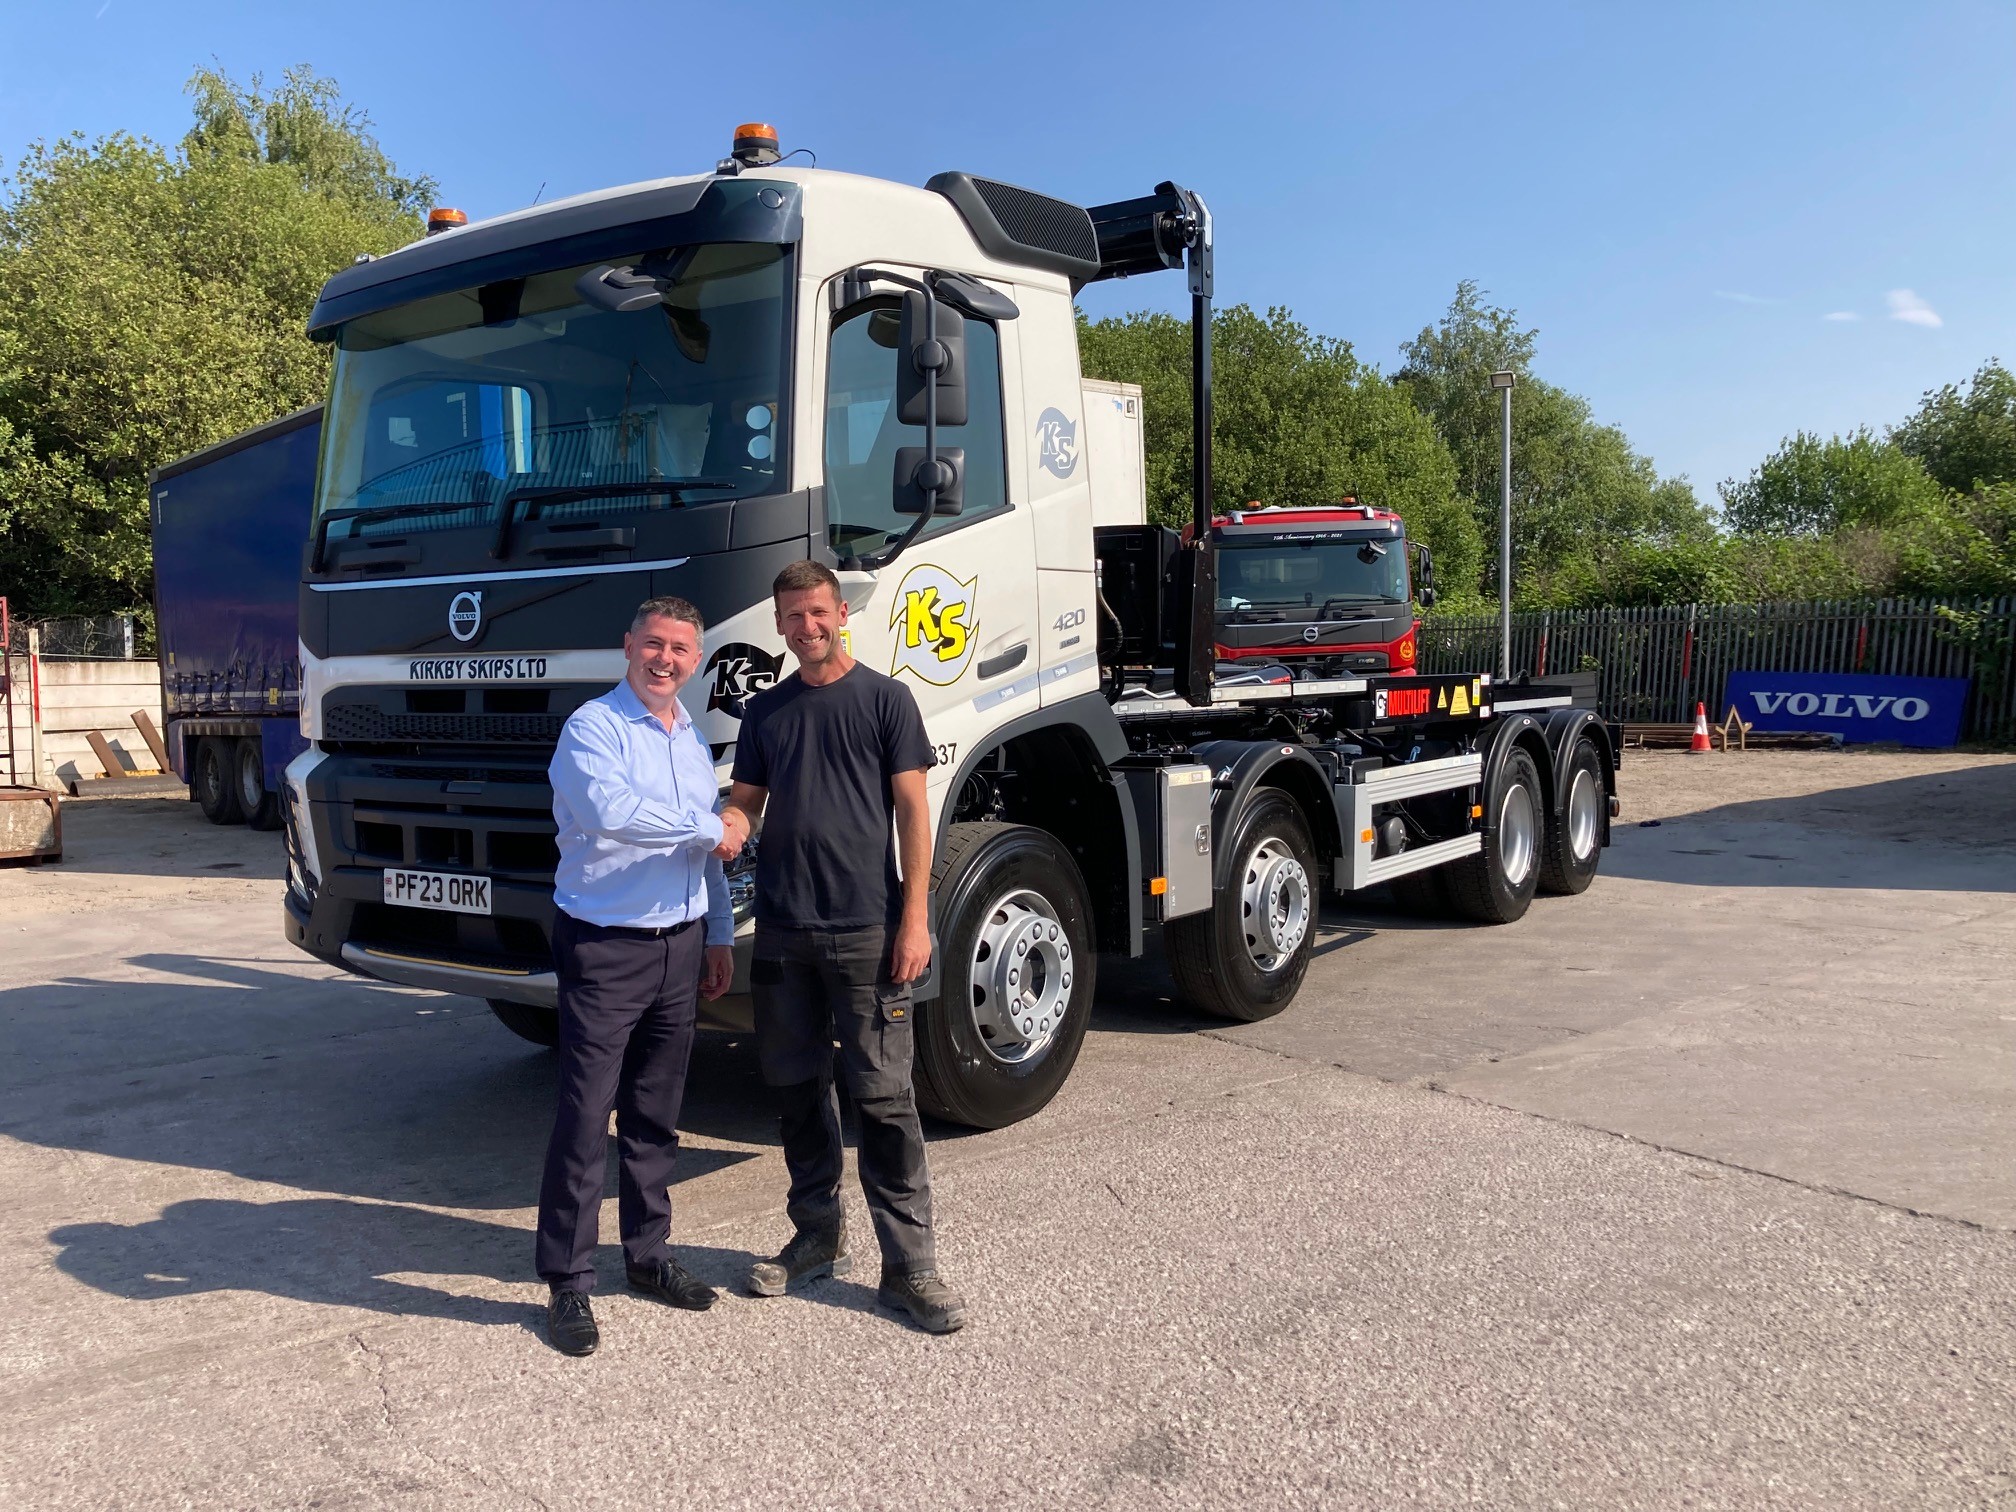 New Volvo FMX13 Truck handed over to Kirkby Skips, Liverpool. Image shows two men looking towards the camera and shaking hands in front of the Volvo truck which has a white cab with the Kirkby skips logo on it.